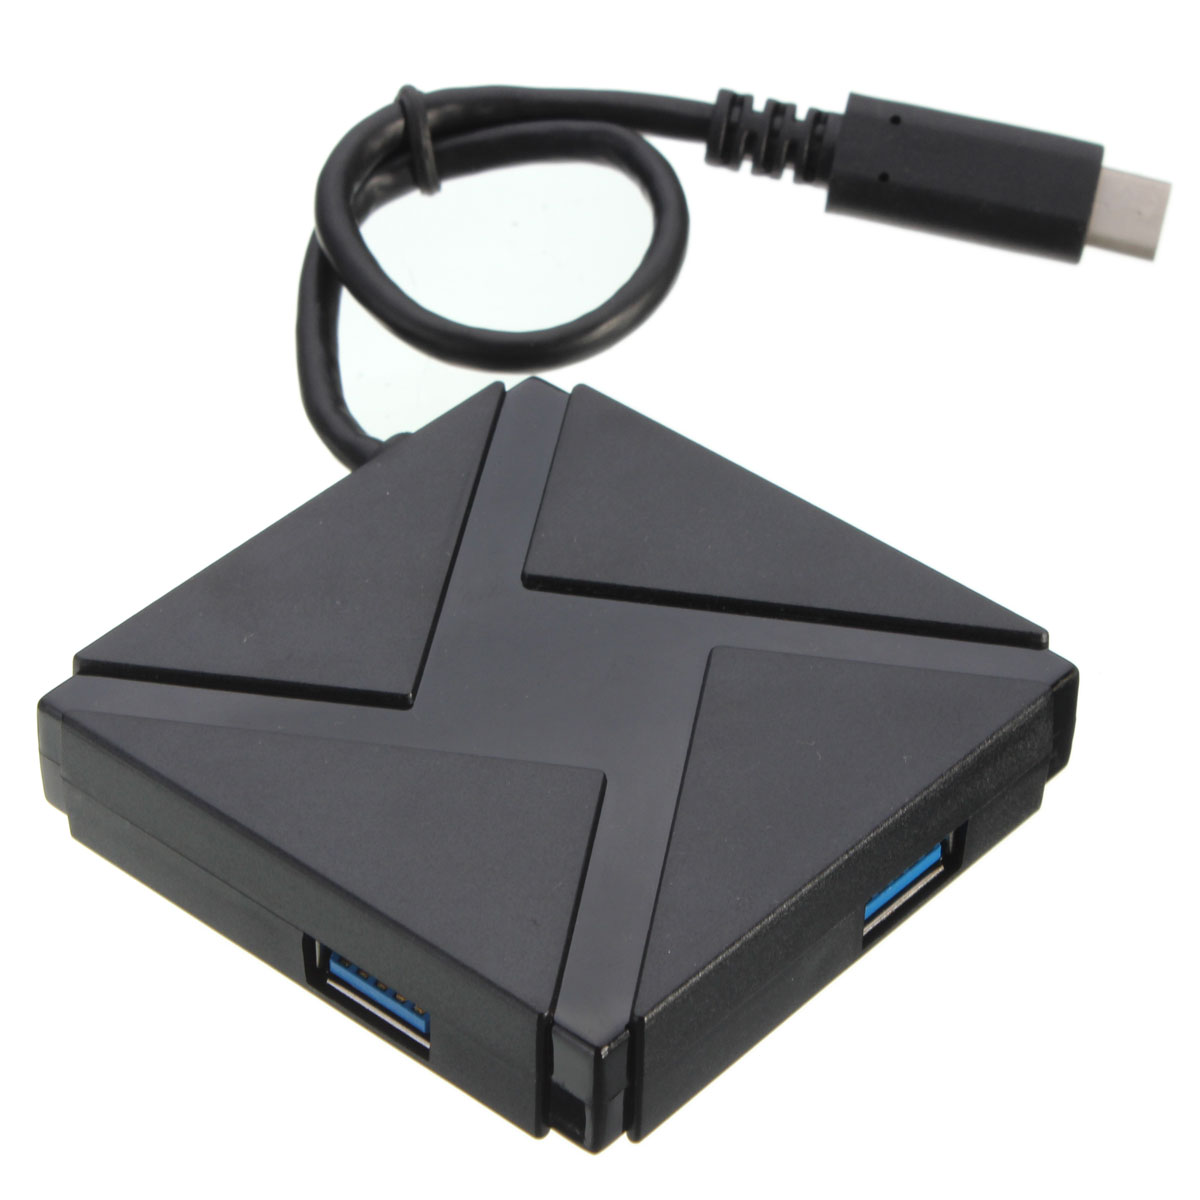 New-High-Speed-Type-C-Hub-USB-31--to-USB-30--4-USB-Ports-Tub-Type-C-Converter-For-Apple-For-Macboo-1259821